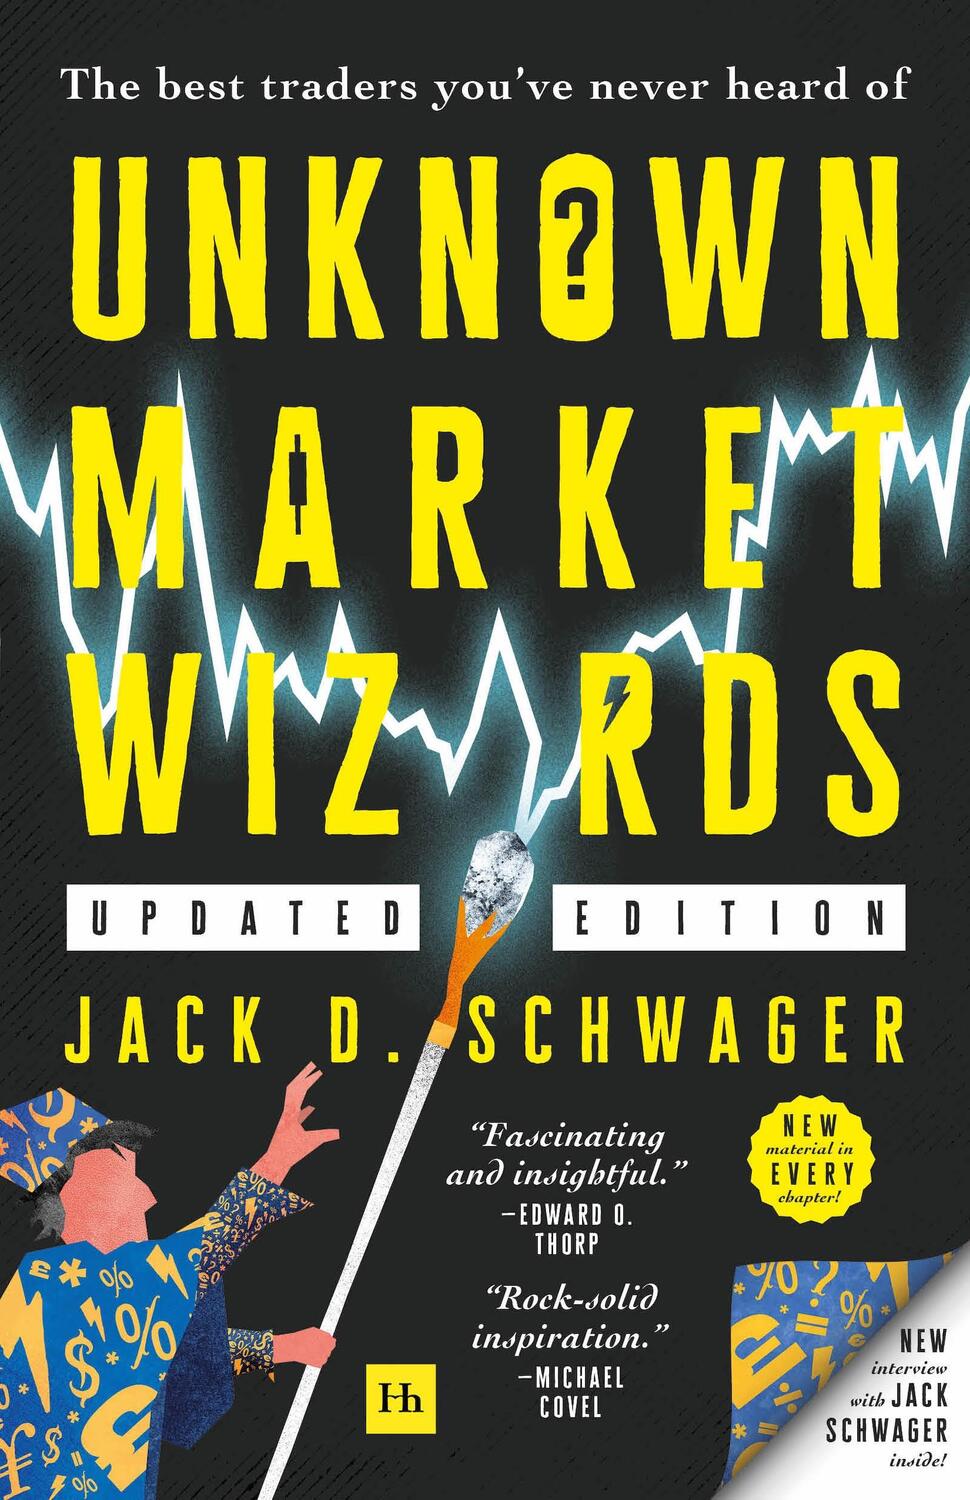 Autor: 9780857198716 | Unknown Market Wizards | The best traders you've never heard of | Buch